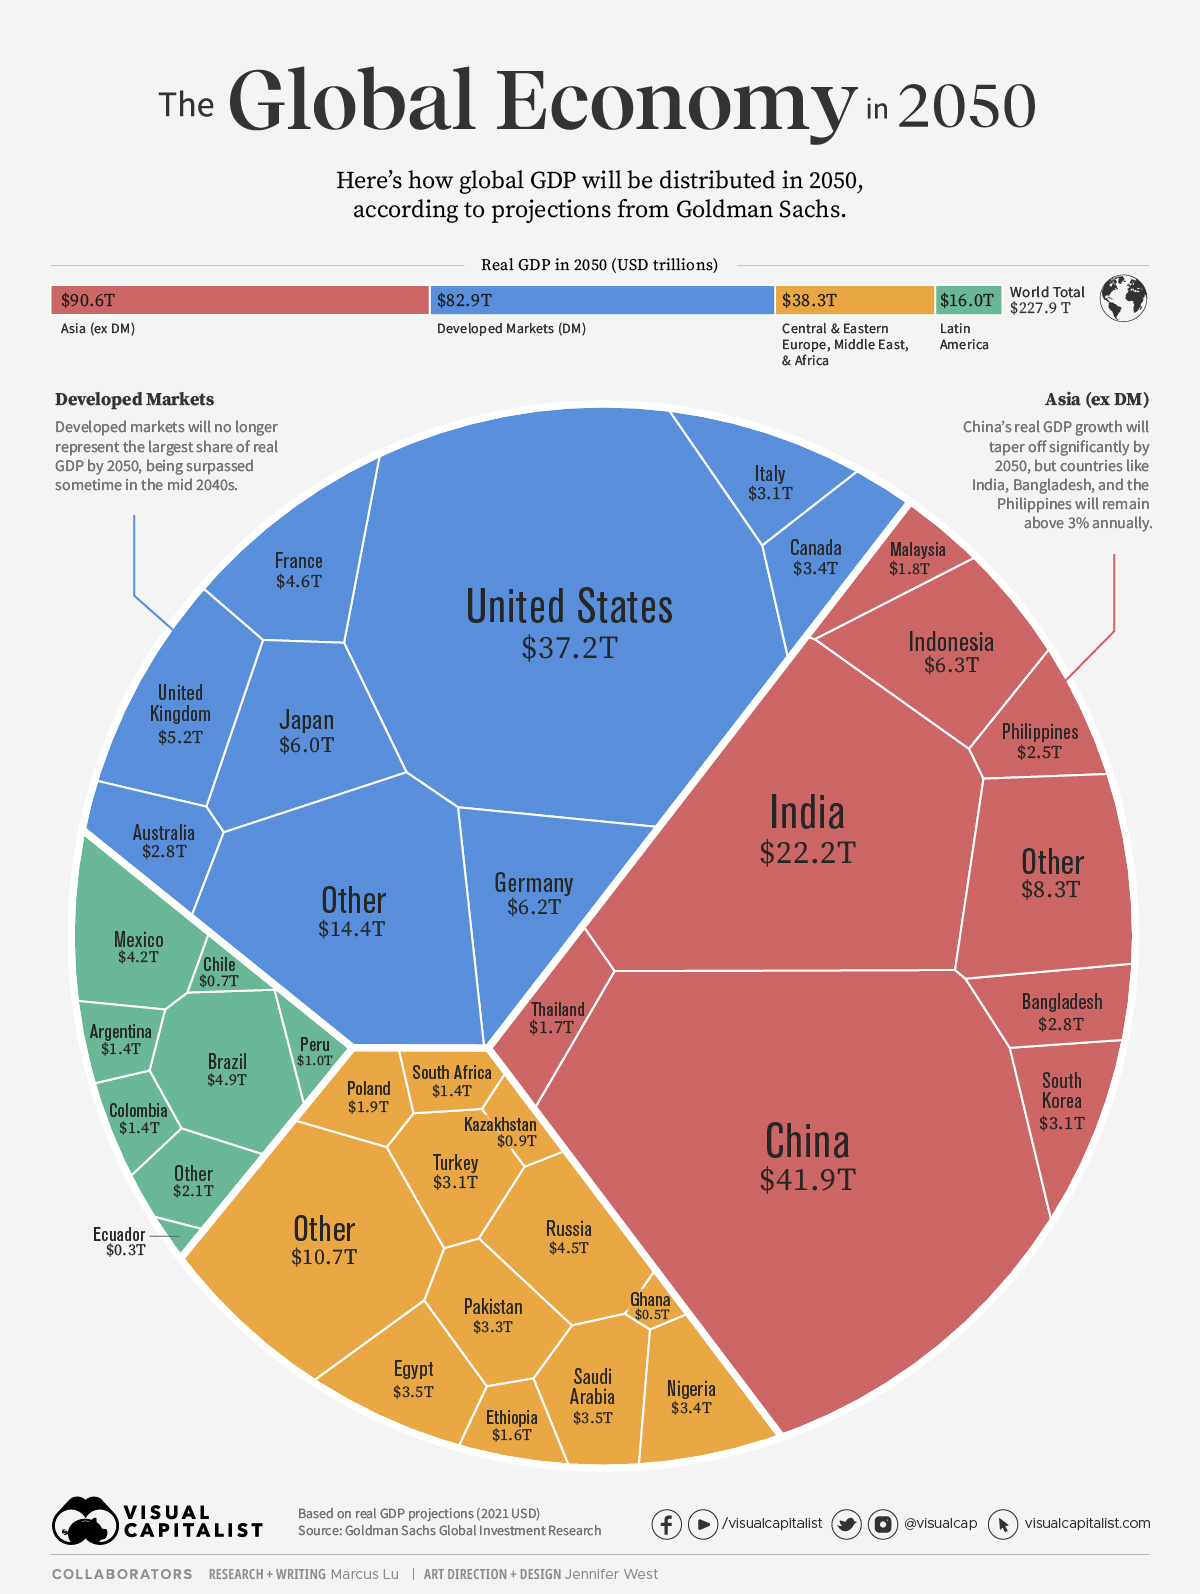 Visualizing the Future Global Economy by GDP in 2050